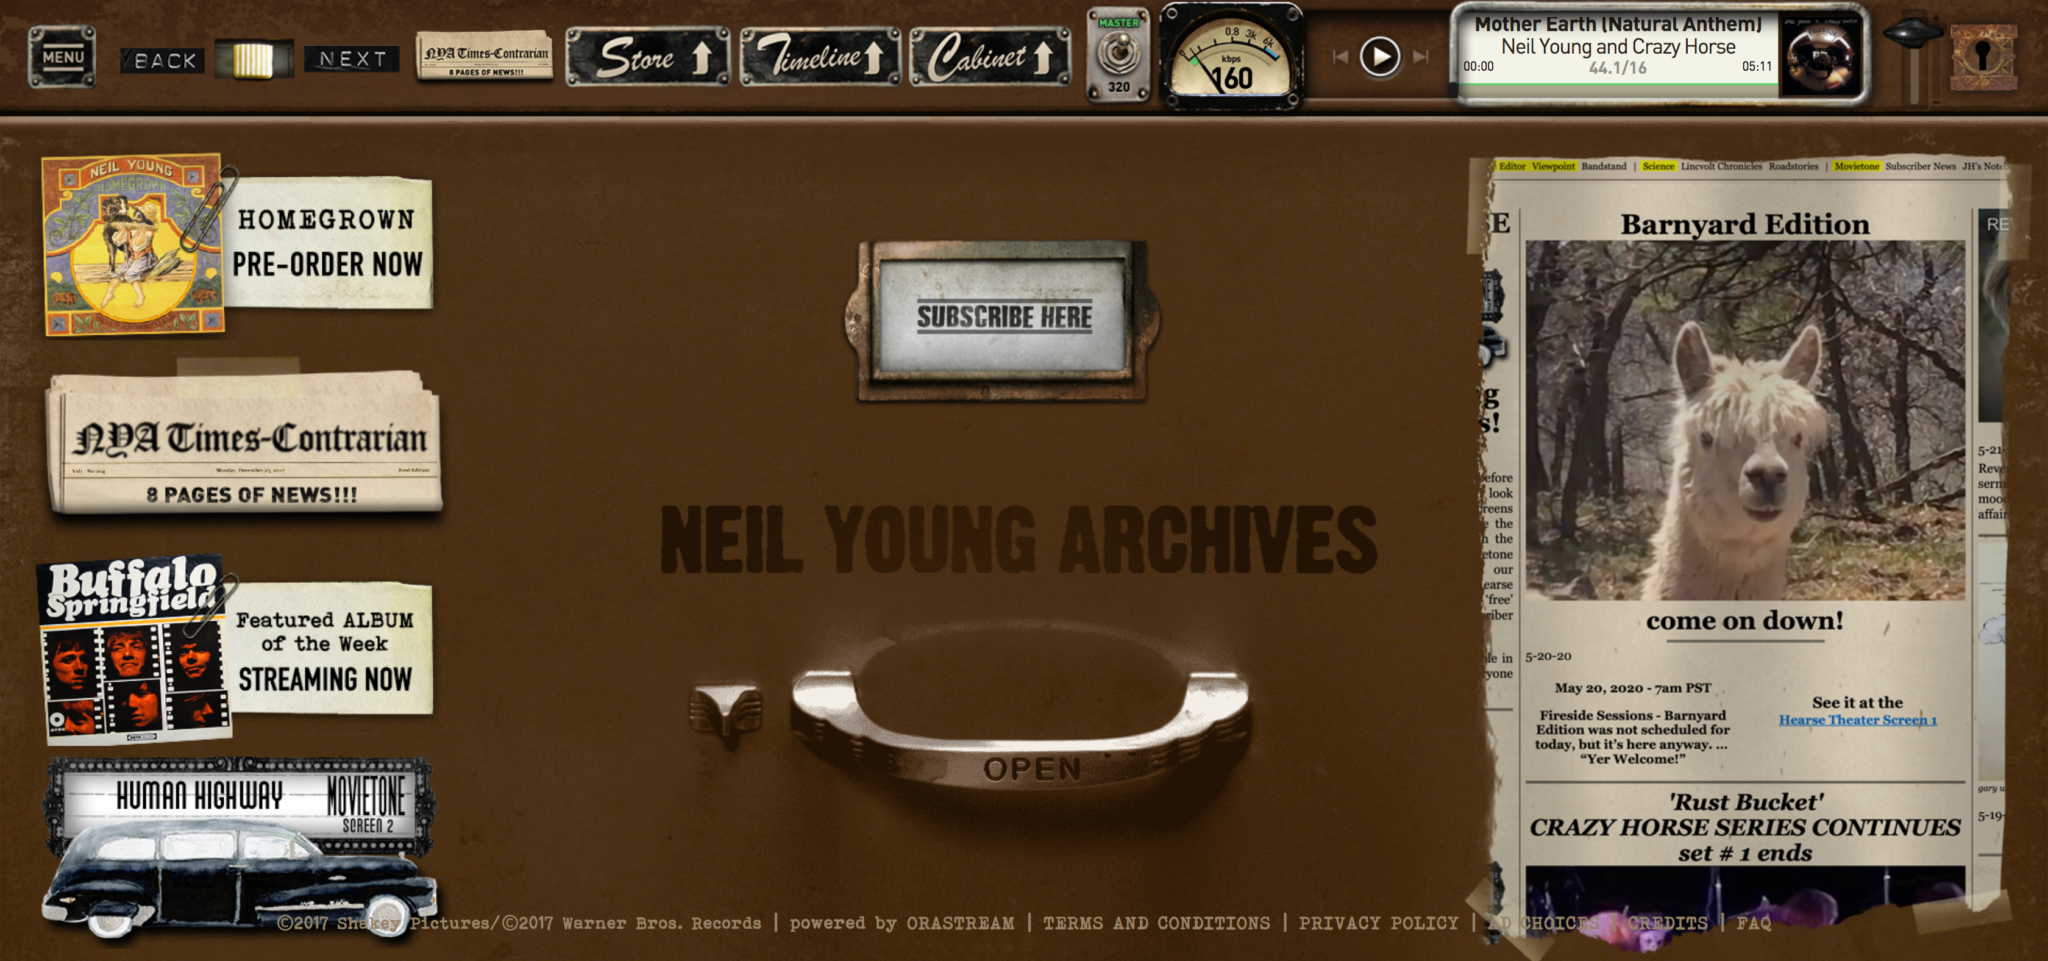 Neil Young Archives Added to BluOS Devices